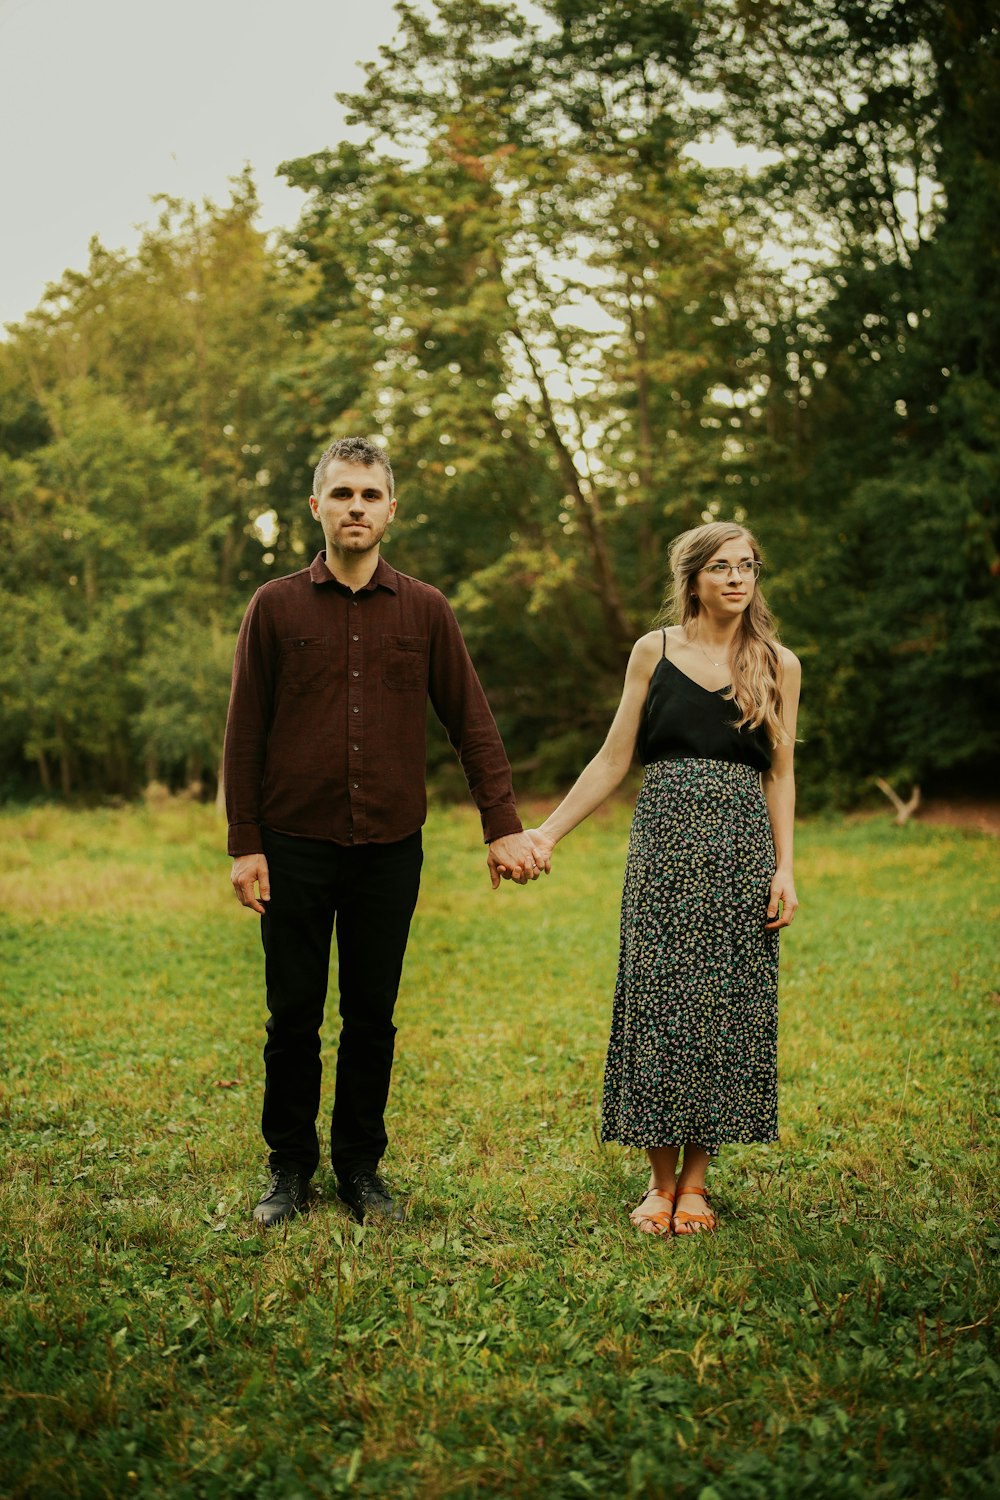 man and woman standing on green grass field during daytime